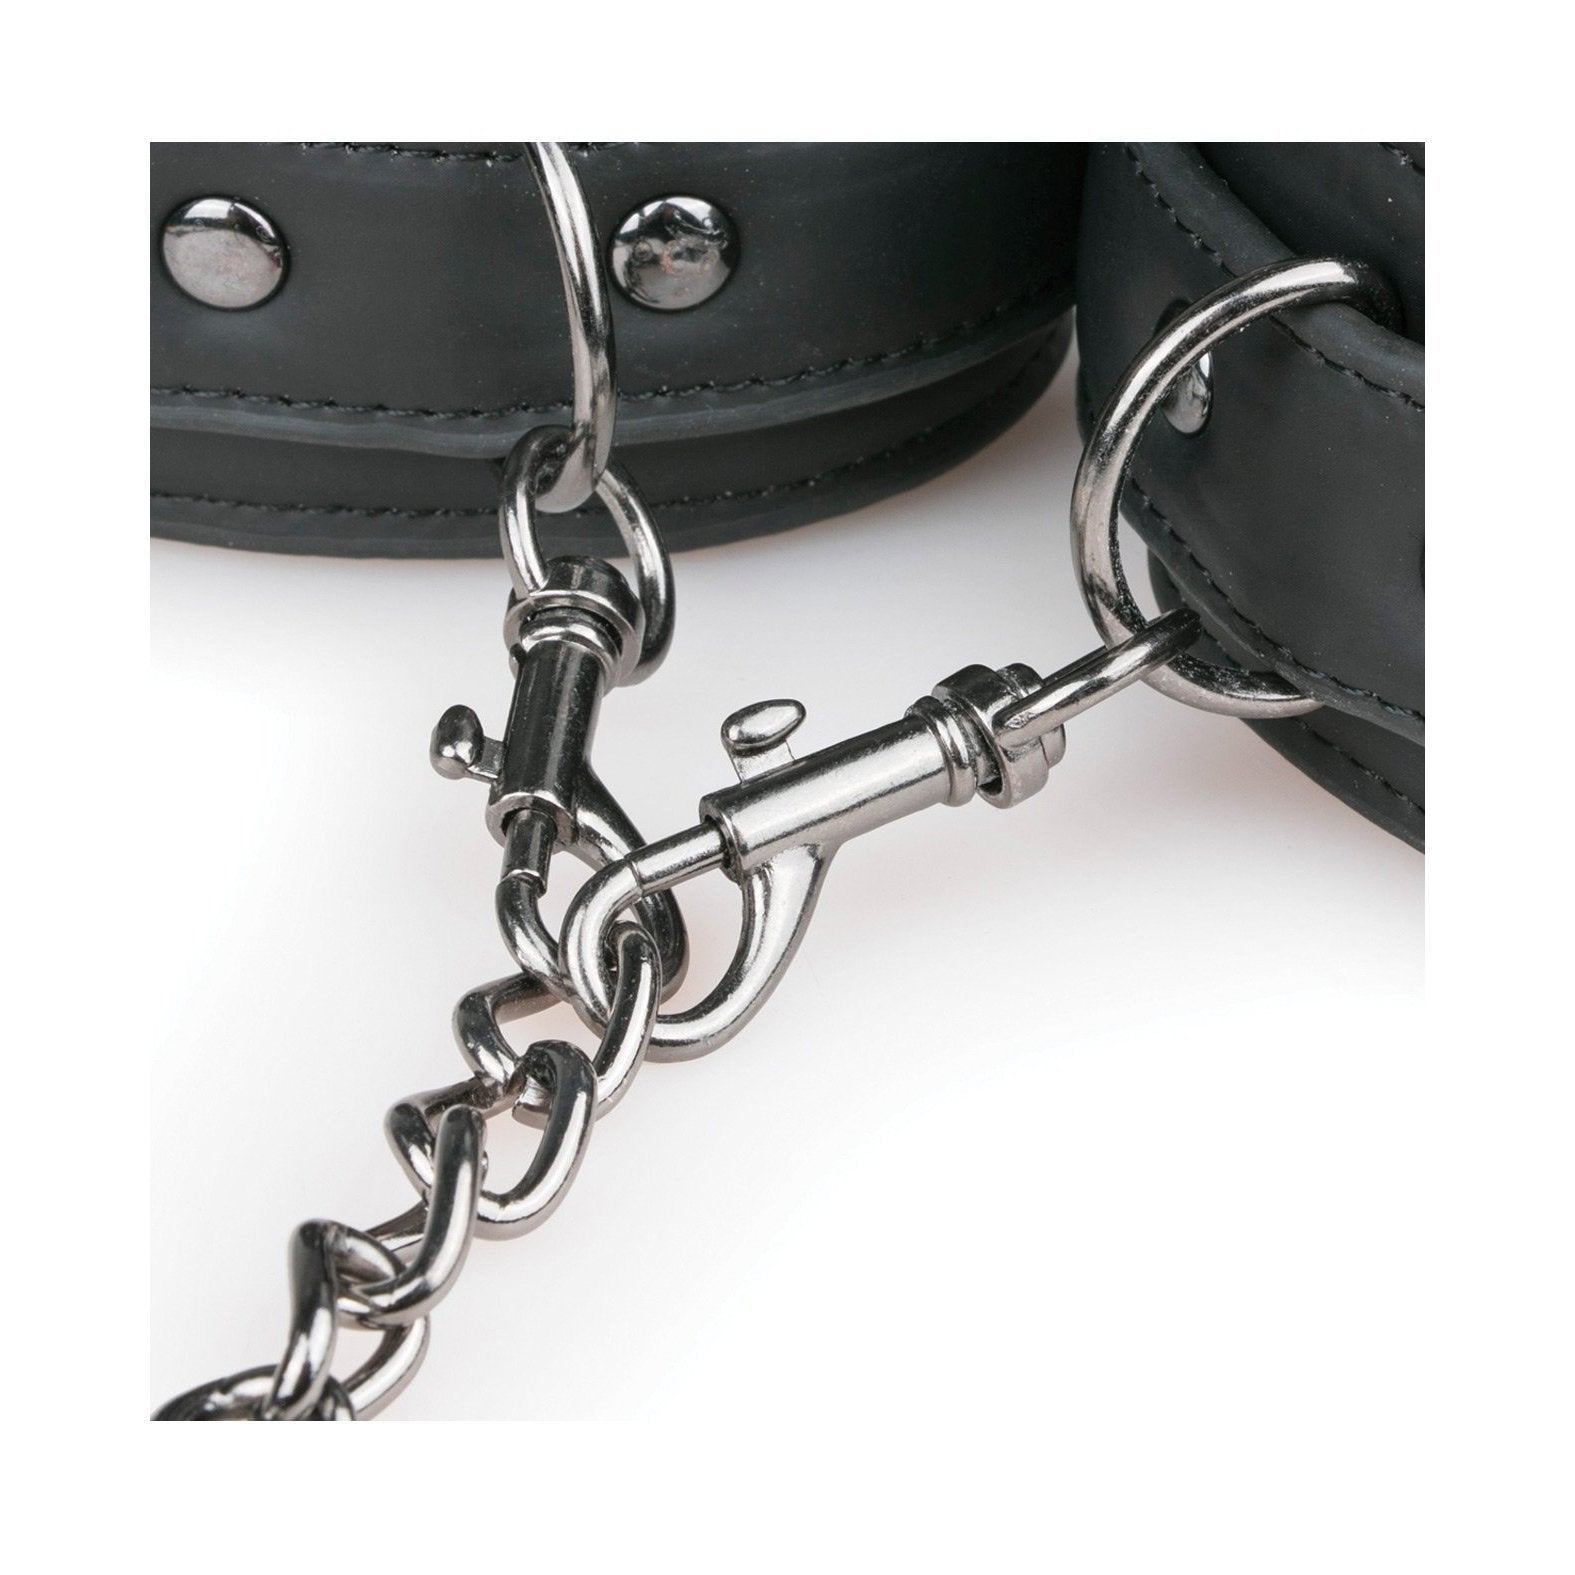 Easy Toys Faux Leather Collar w/ Handcuffs